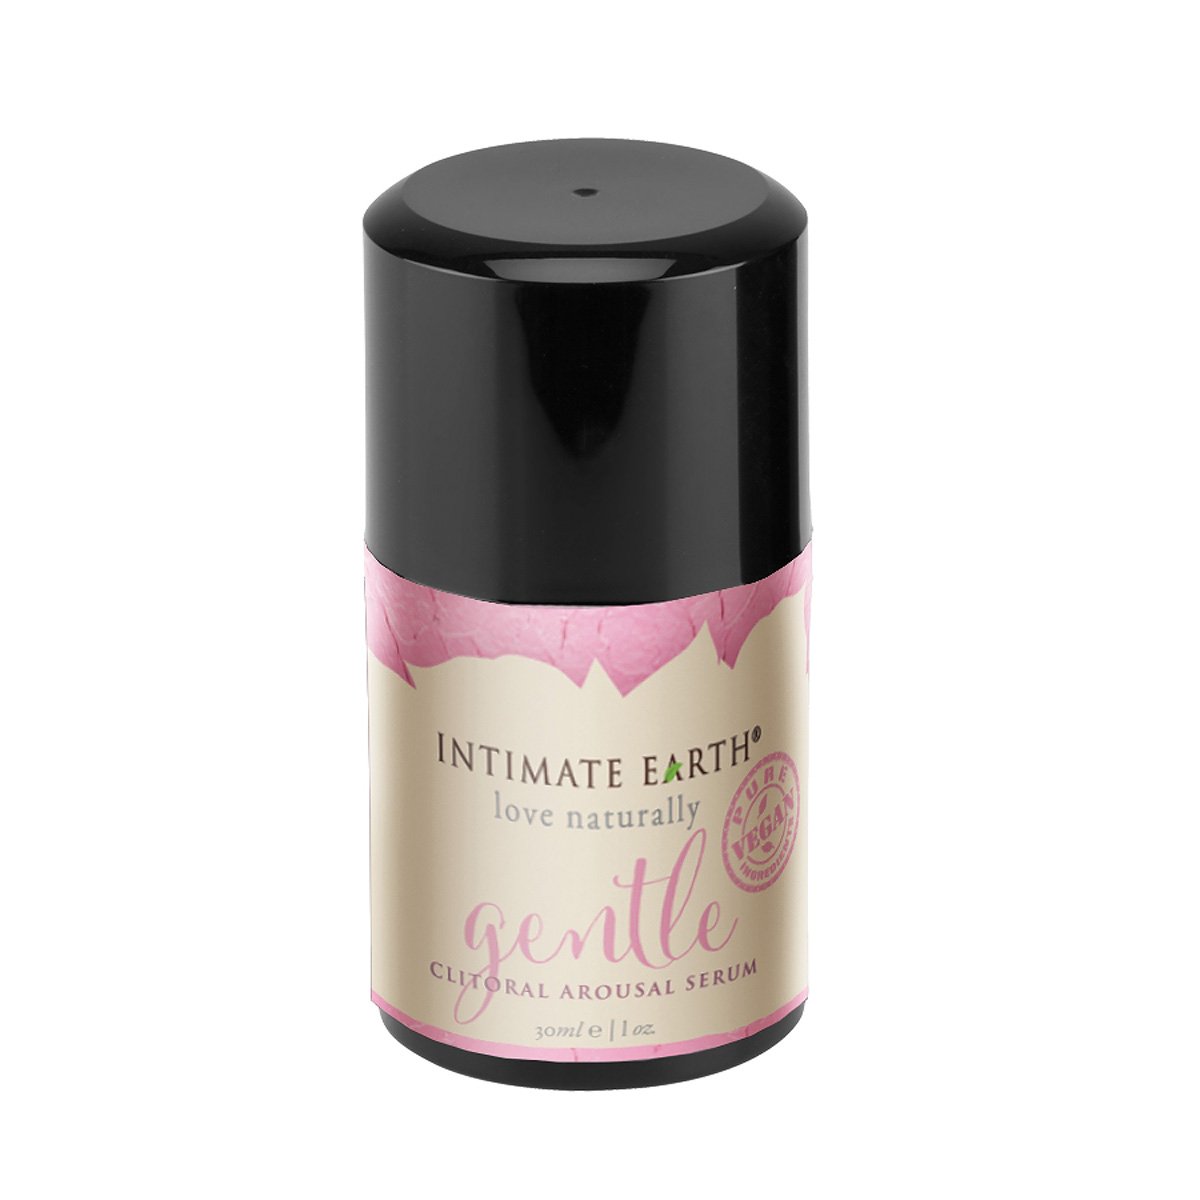 Intimate Earth Gentle Clitoral Arousal Serum 1oz - Buy At Luxury Toy X - Free 3-Day Shipping